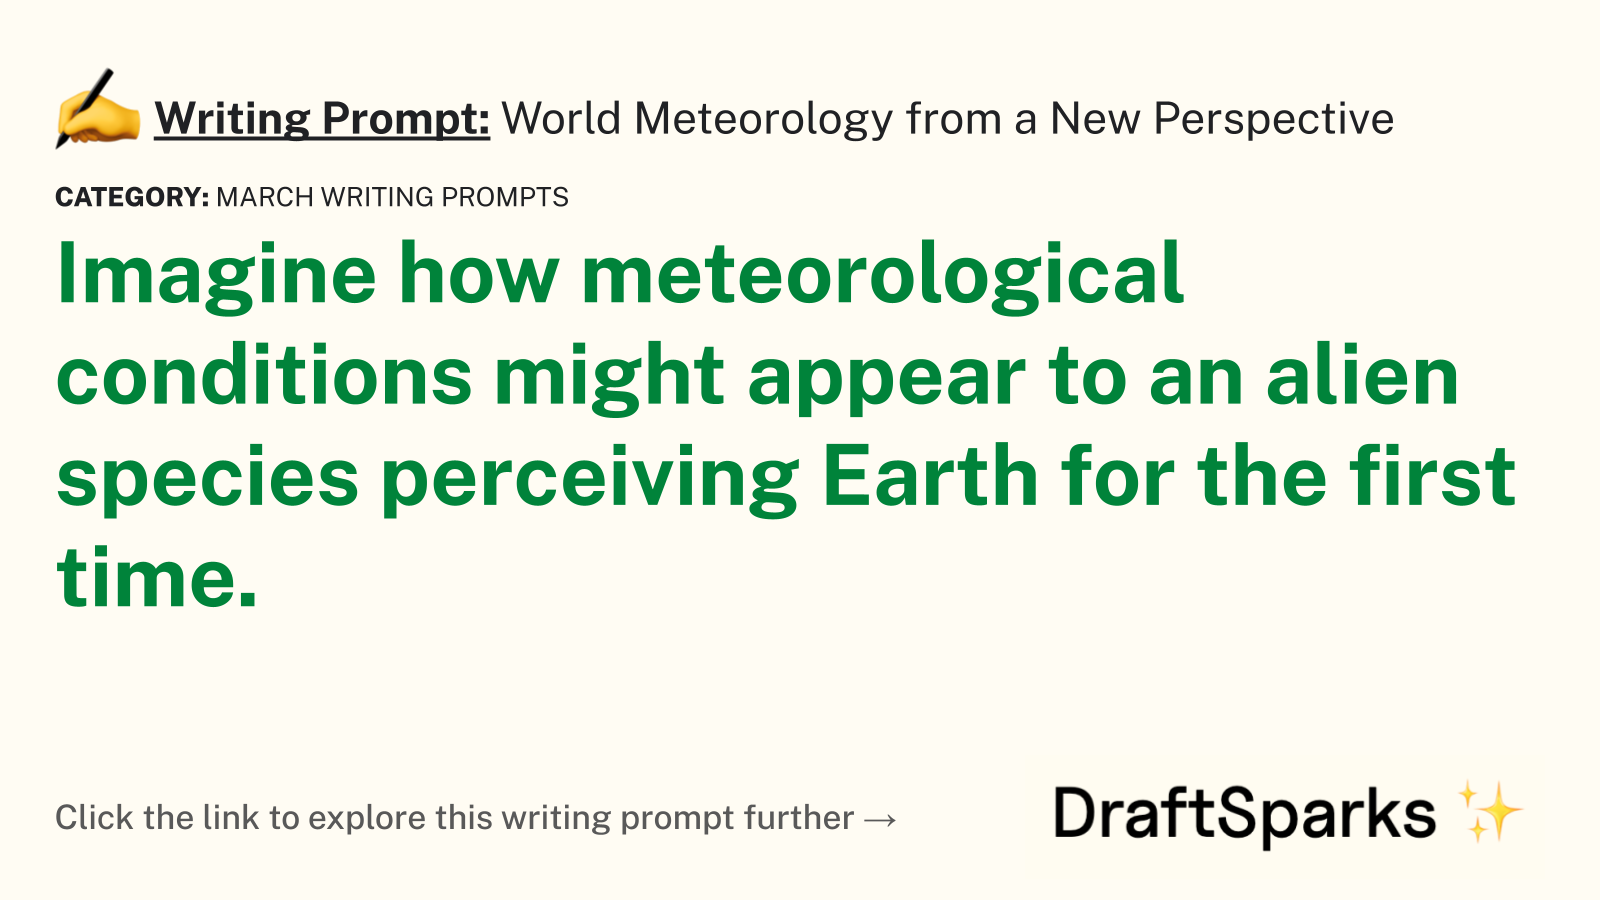 World Meteorology from a New Perspective